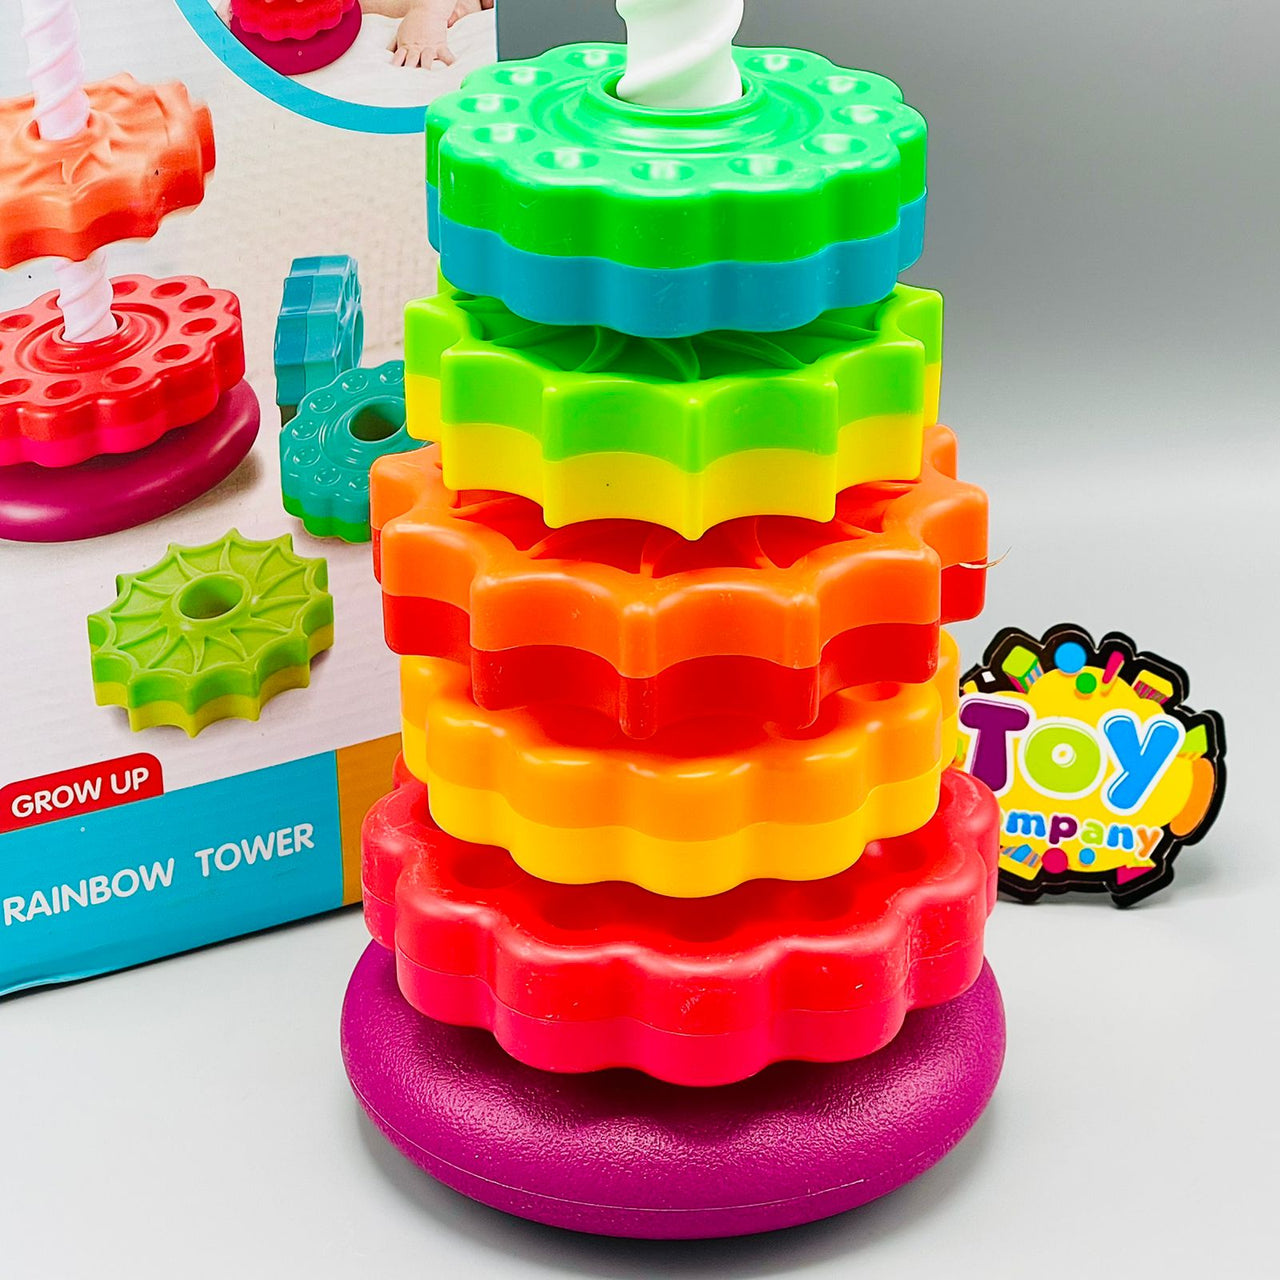 Rainbow Stacking Spinning Tower